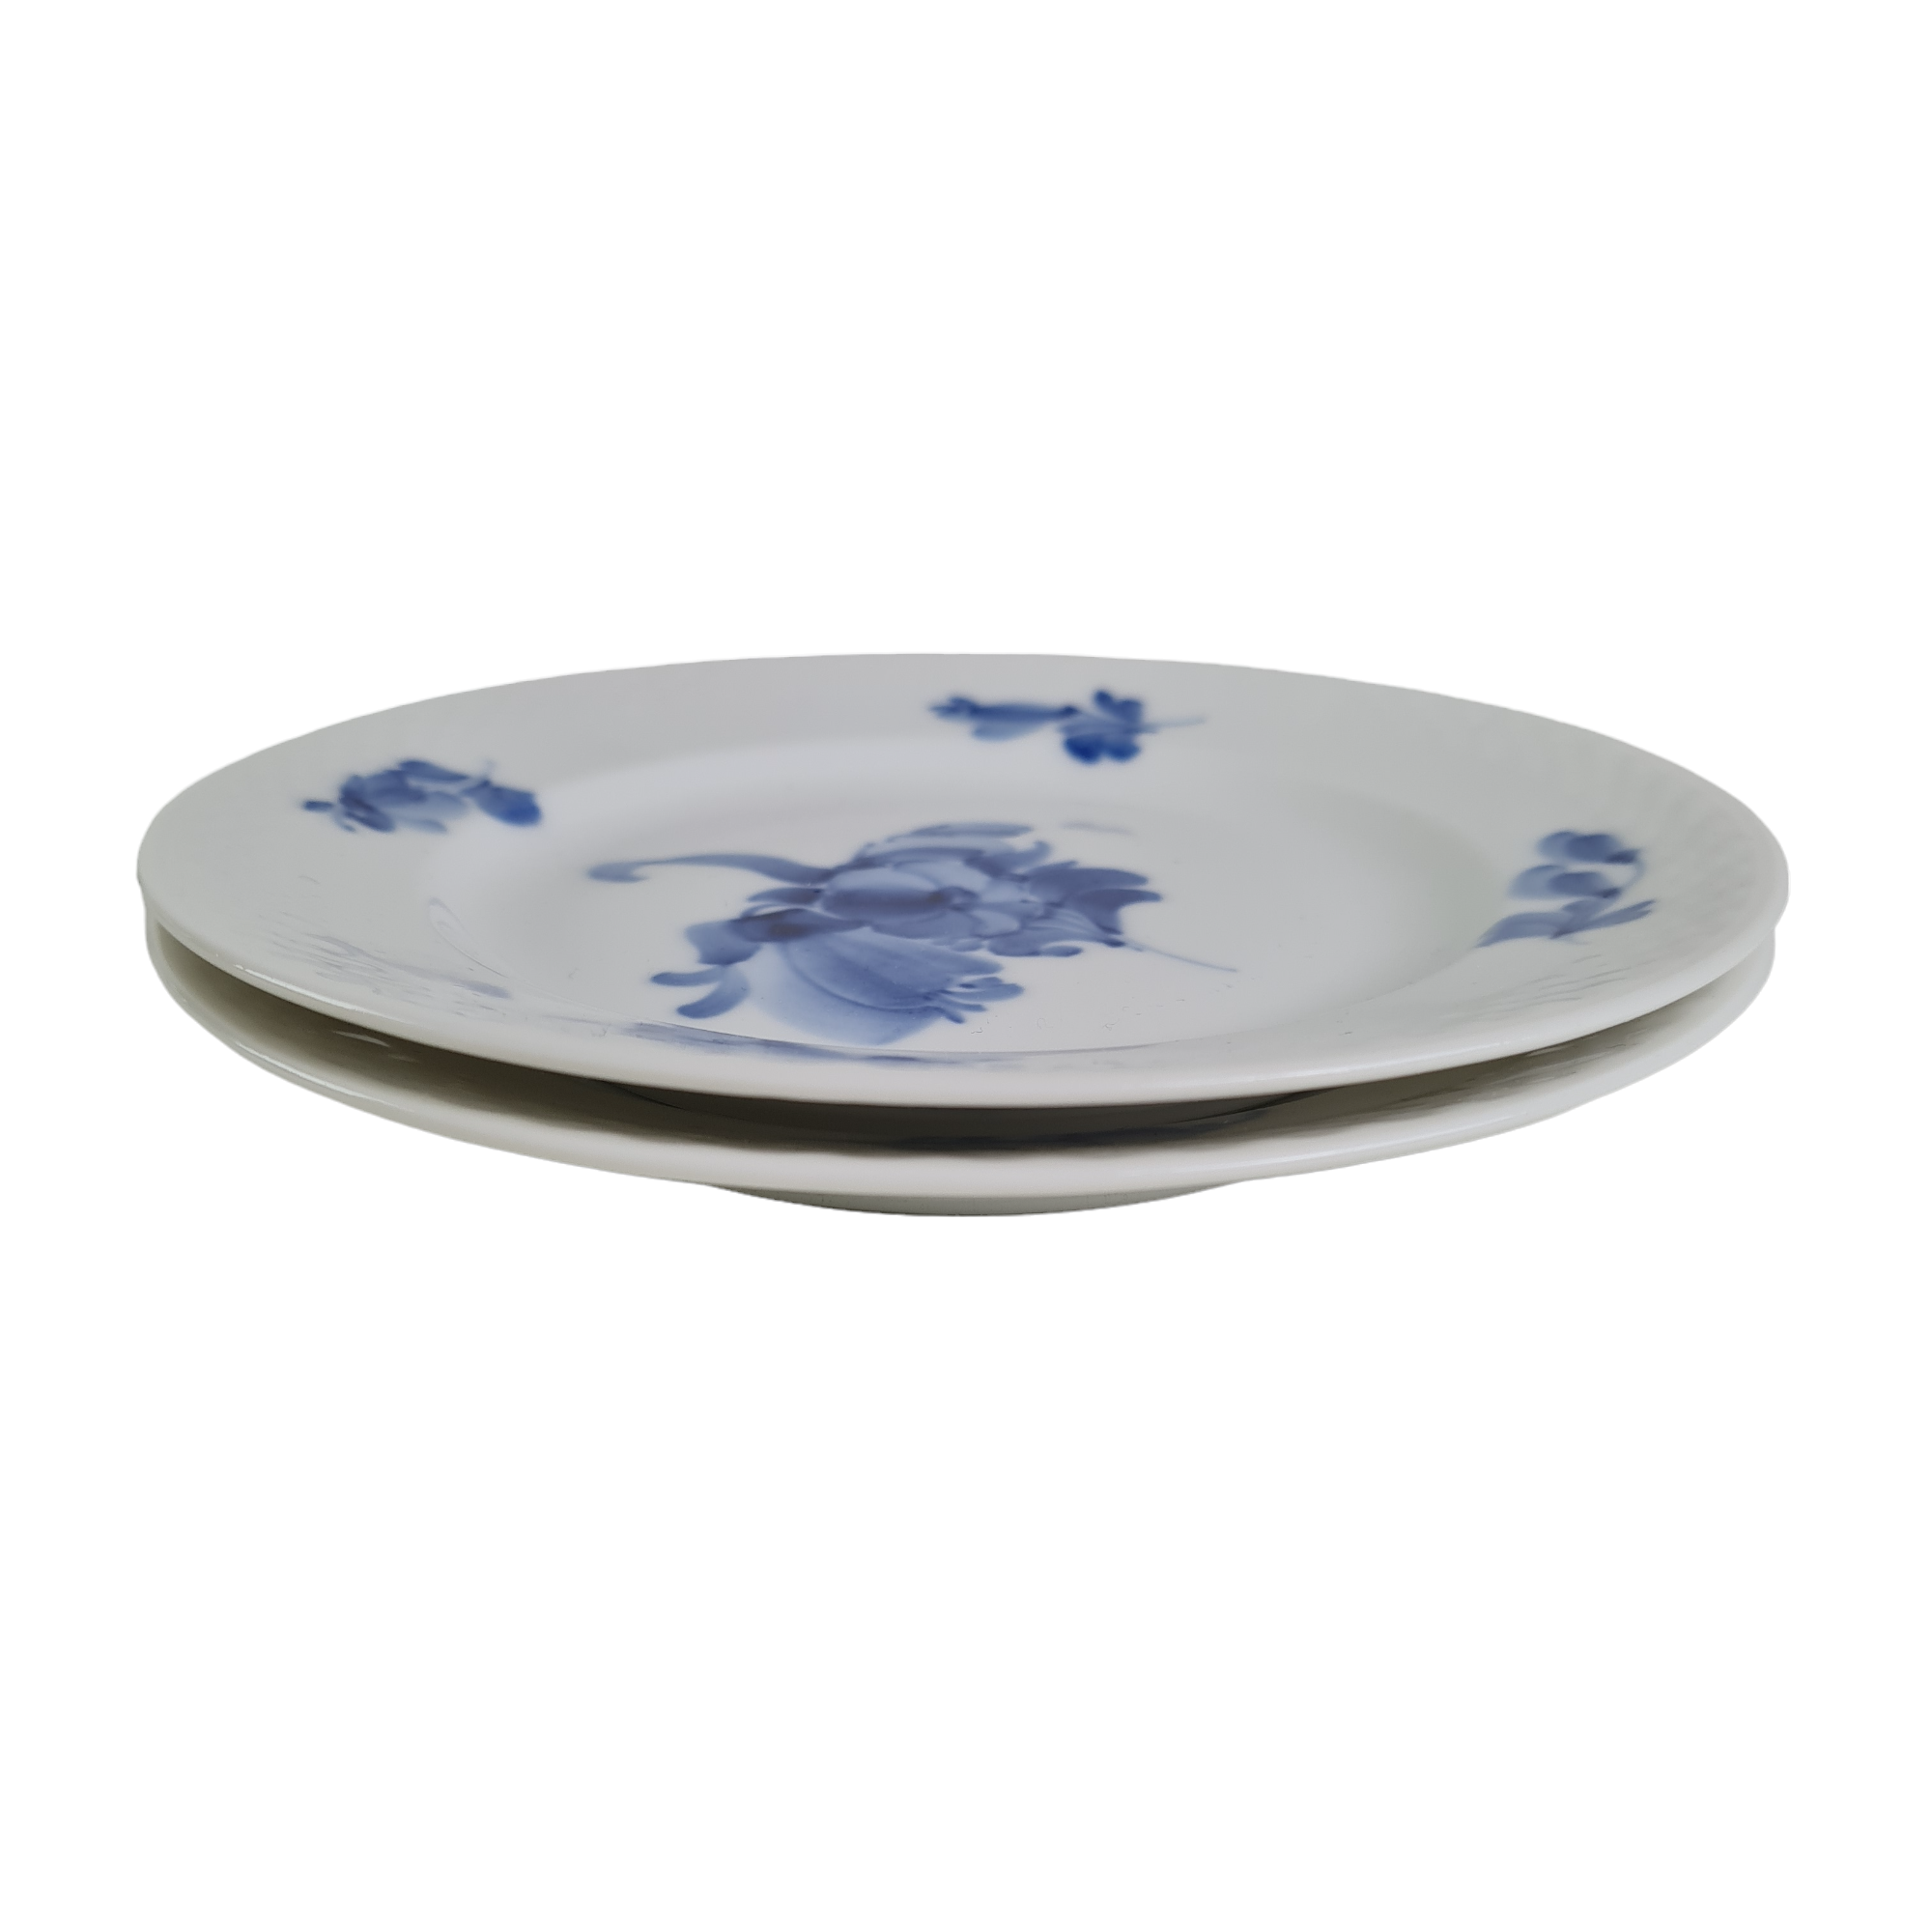 Three Blue Flower Braided Cake Plates From Royal